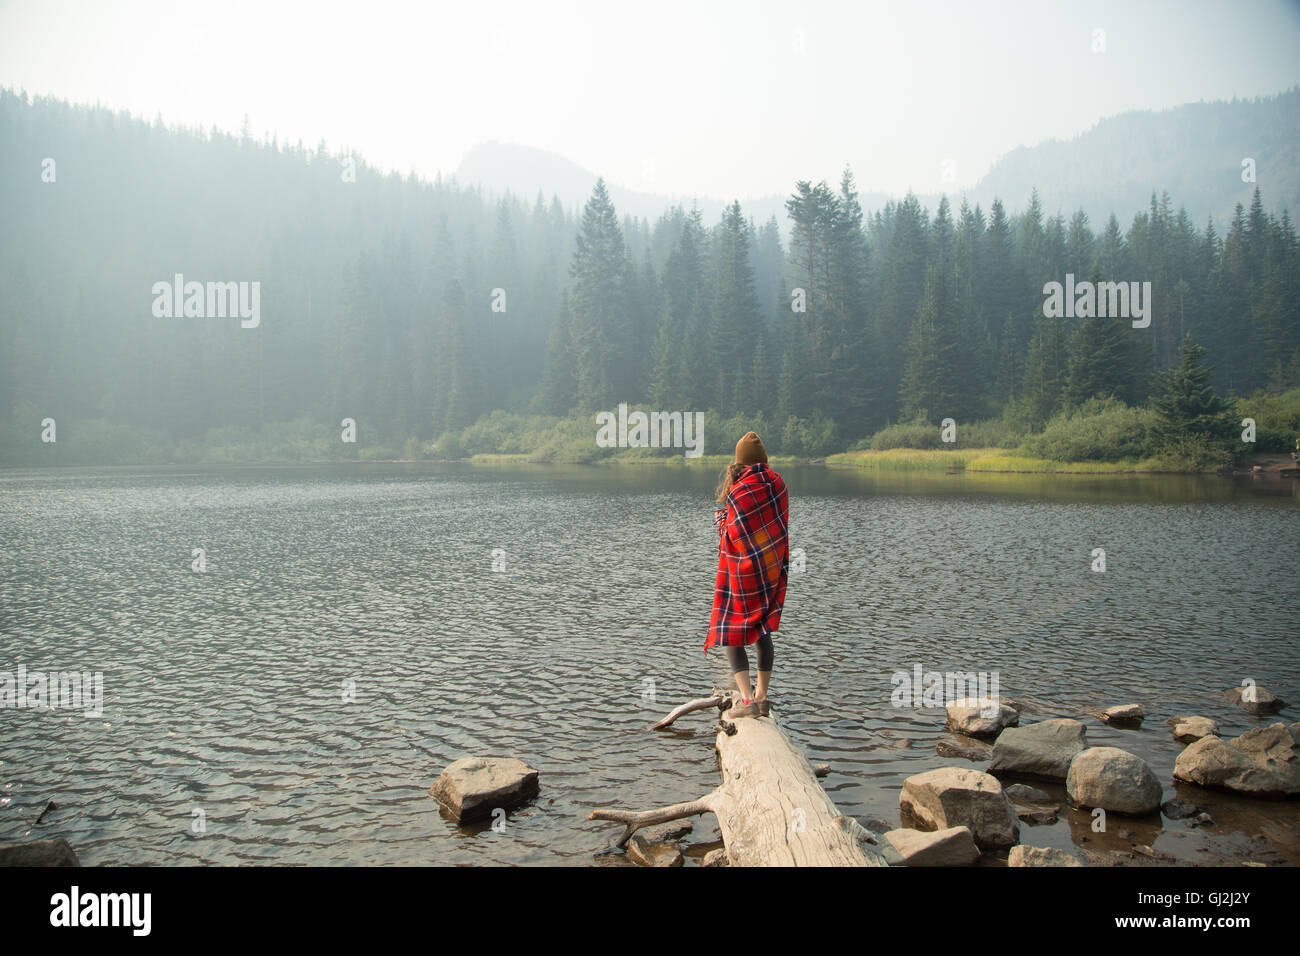 Woman wrapped in tartan blanket looking out over misty lake, Mount Hood National Forest, Oregon, USA Stock Photo